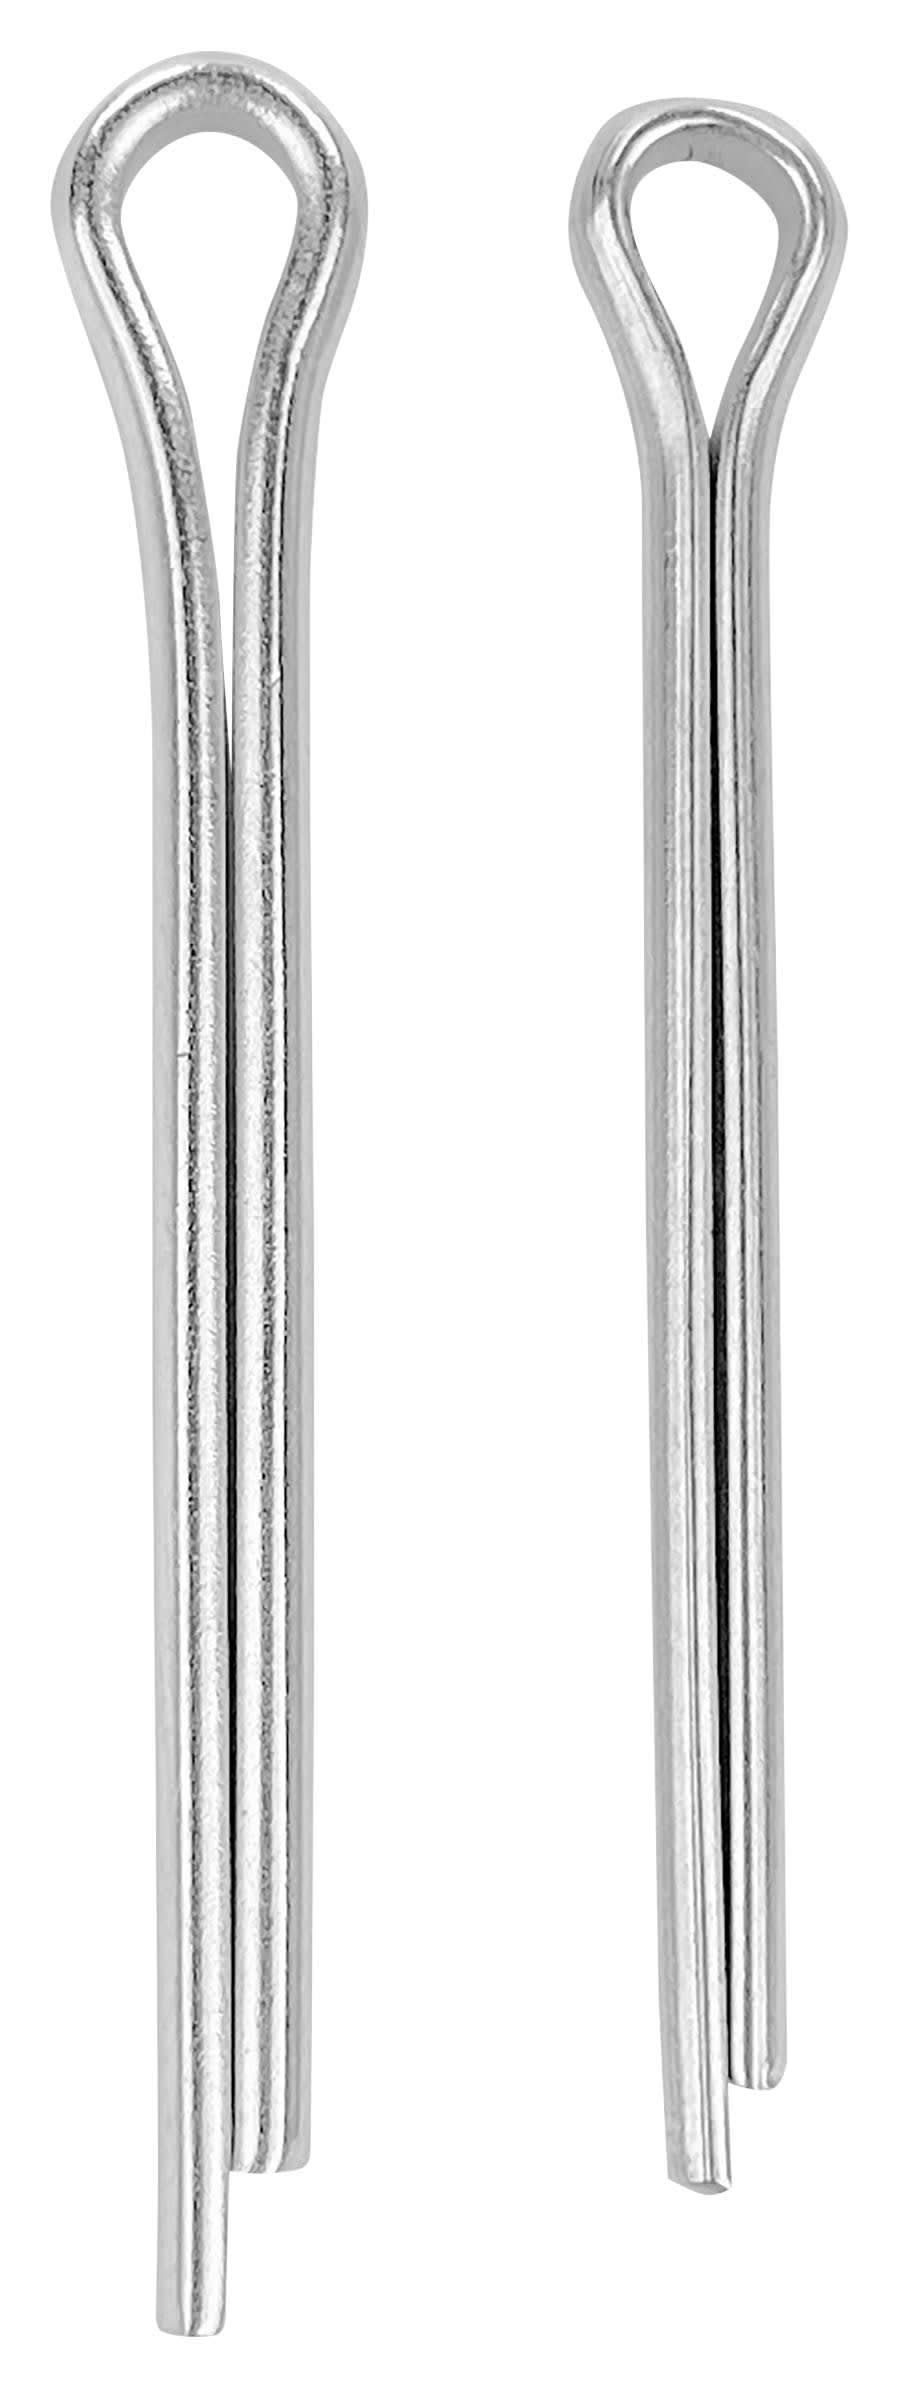 Bass Pro Shops® Stainless Steel Cotter Pin 12-Piece Kit